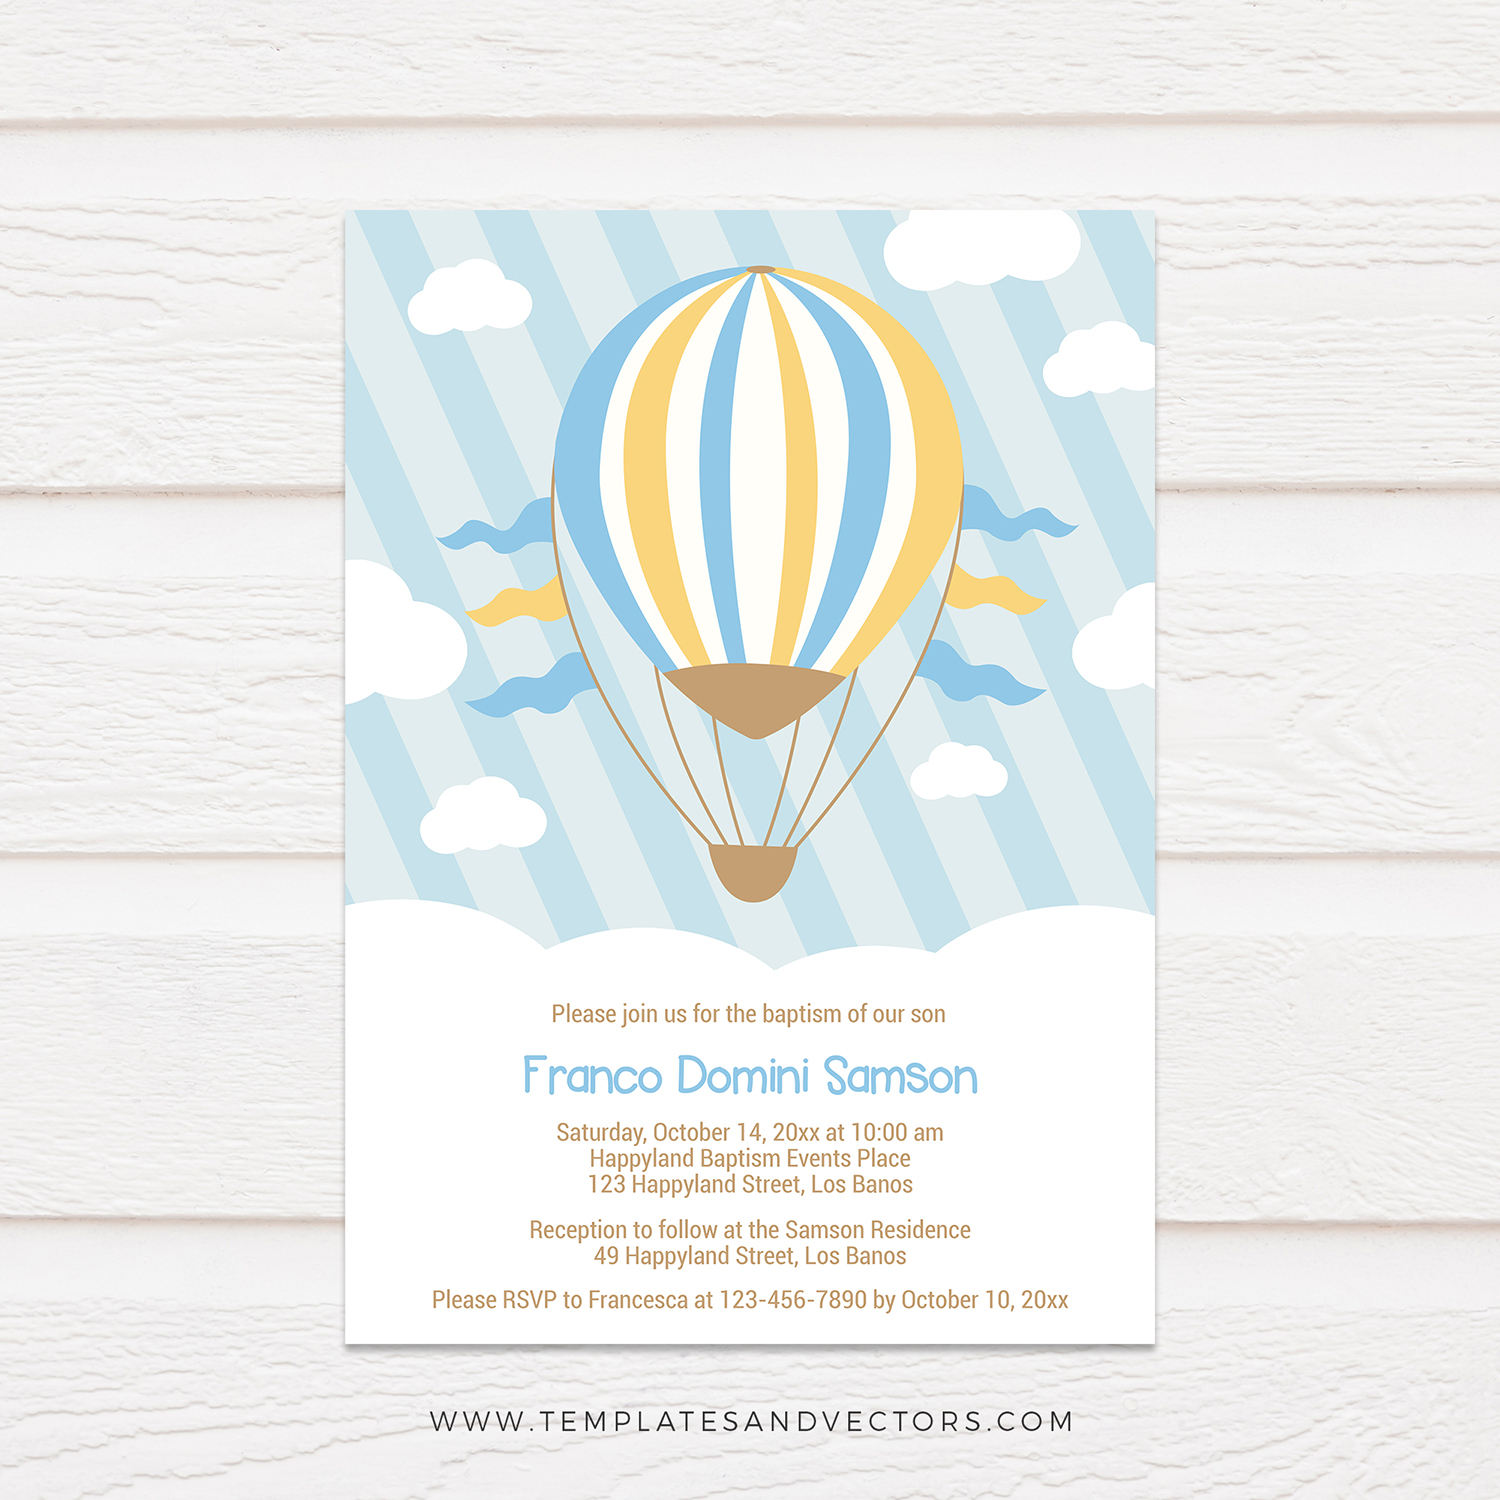 Tvc175 Hot Air Balloon Ride Baptism Invitation Diy Printable Template intended for dimensions 1500 X 1500